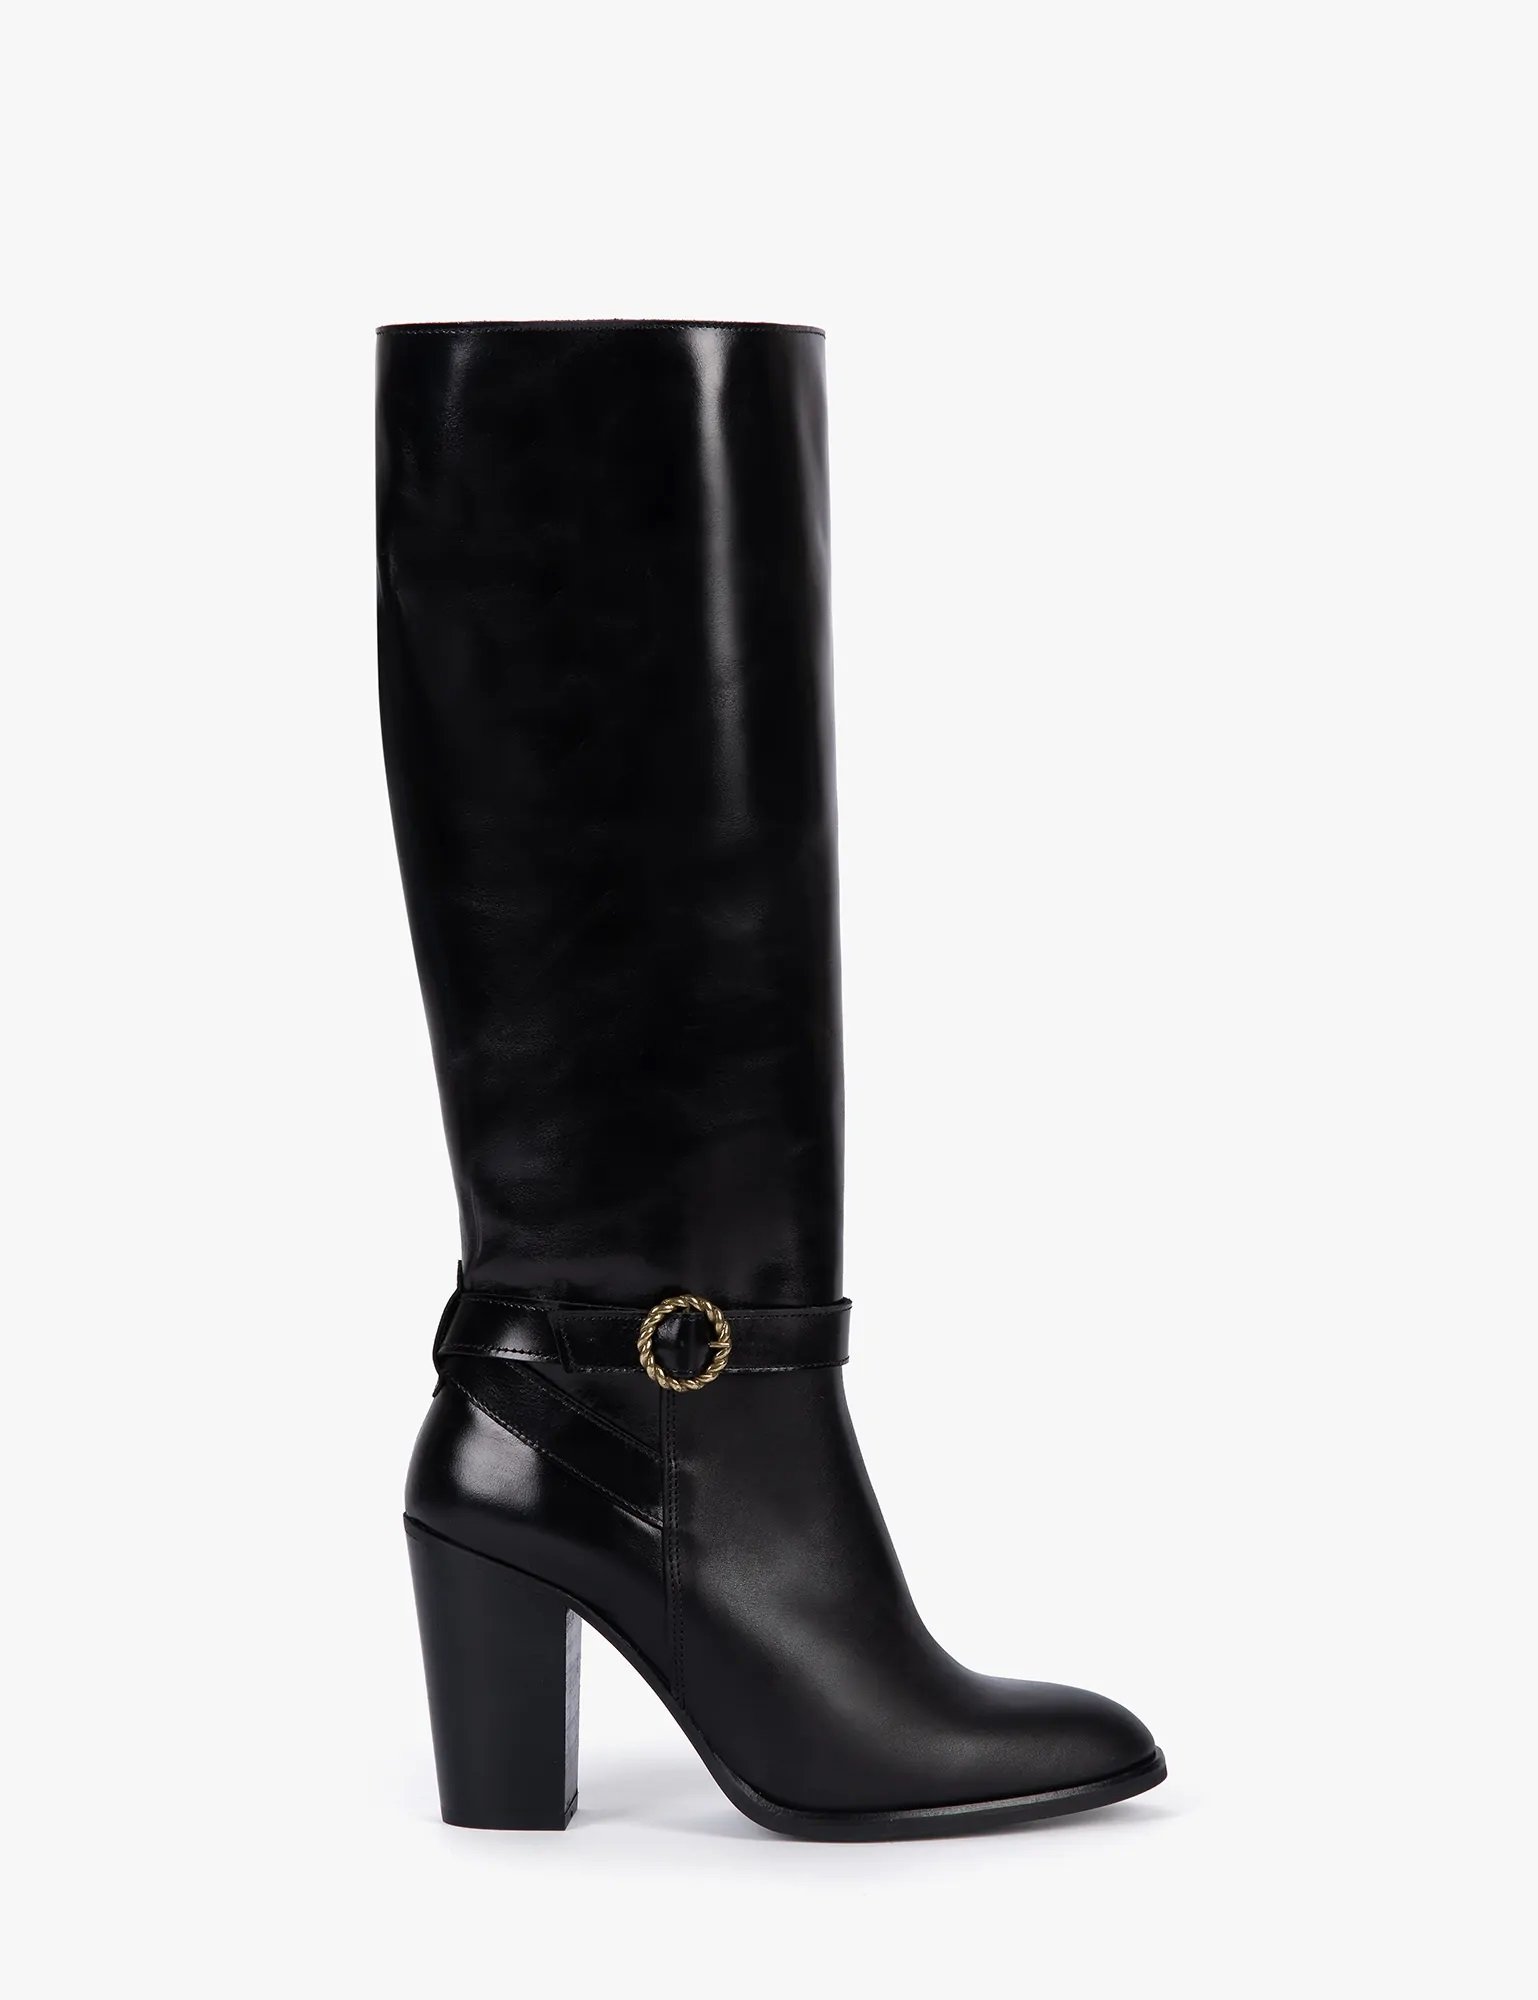 Penelope Chilvers Burford Boots in Black Leather.jpg